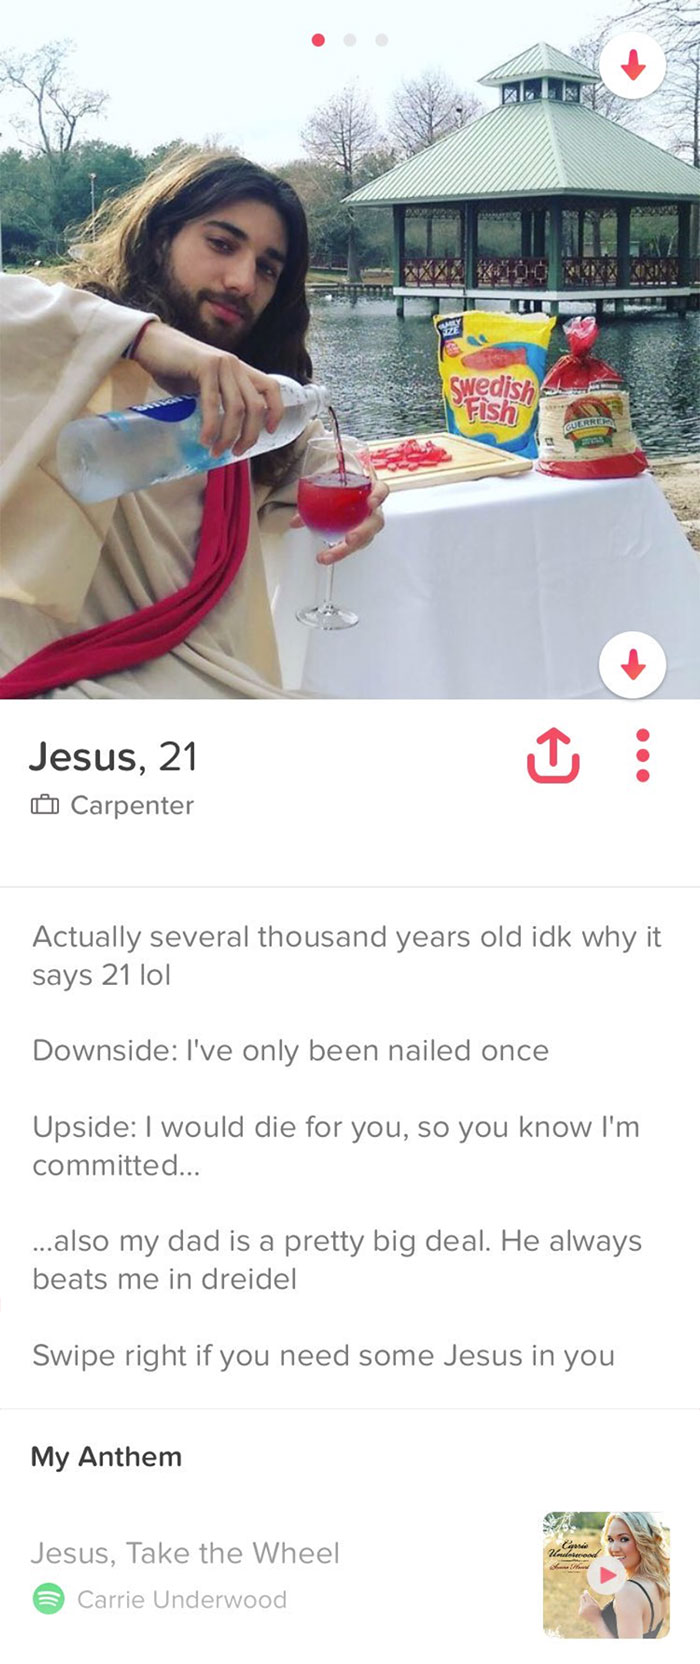 jesus on tinder - Swedish Fish Jesus, 21 0 Carpenter Actually several thousand years old idk why it says 21 lol Downside I've only been nailed once Upside I would die for you, so you know I'm committed... ... also my dad is a pretty big deal. He always be